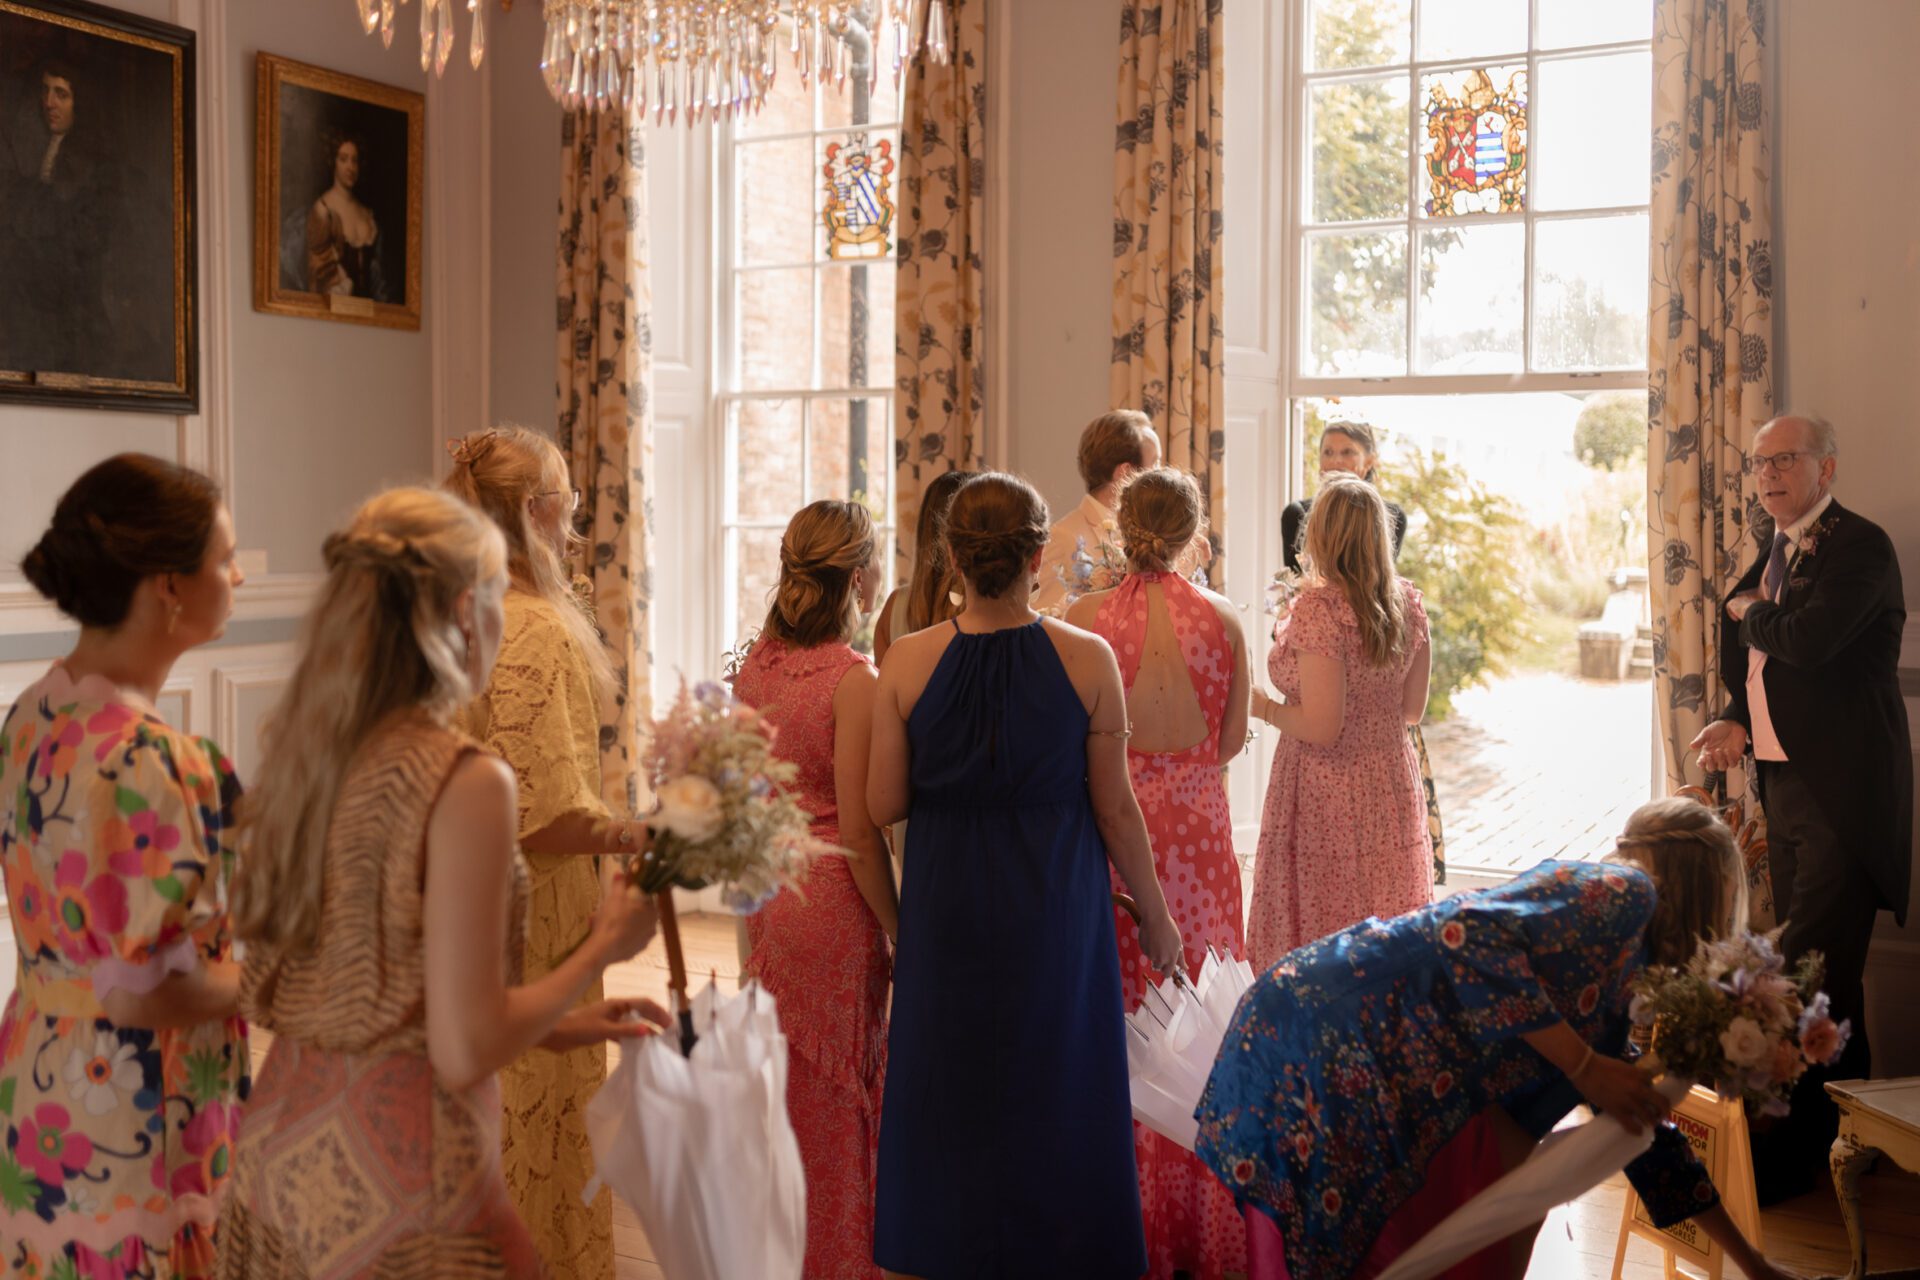 The bridal party get ready for the wedding ceremony at Brickwall House, Kent wedding venue